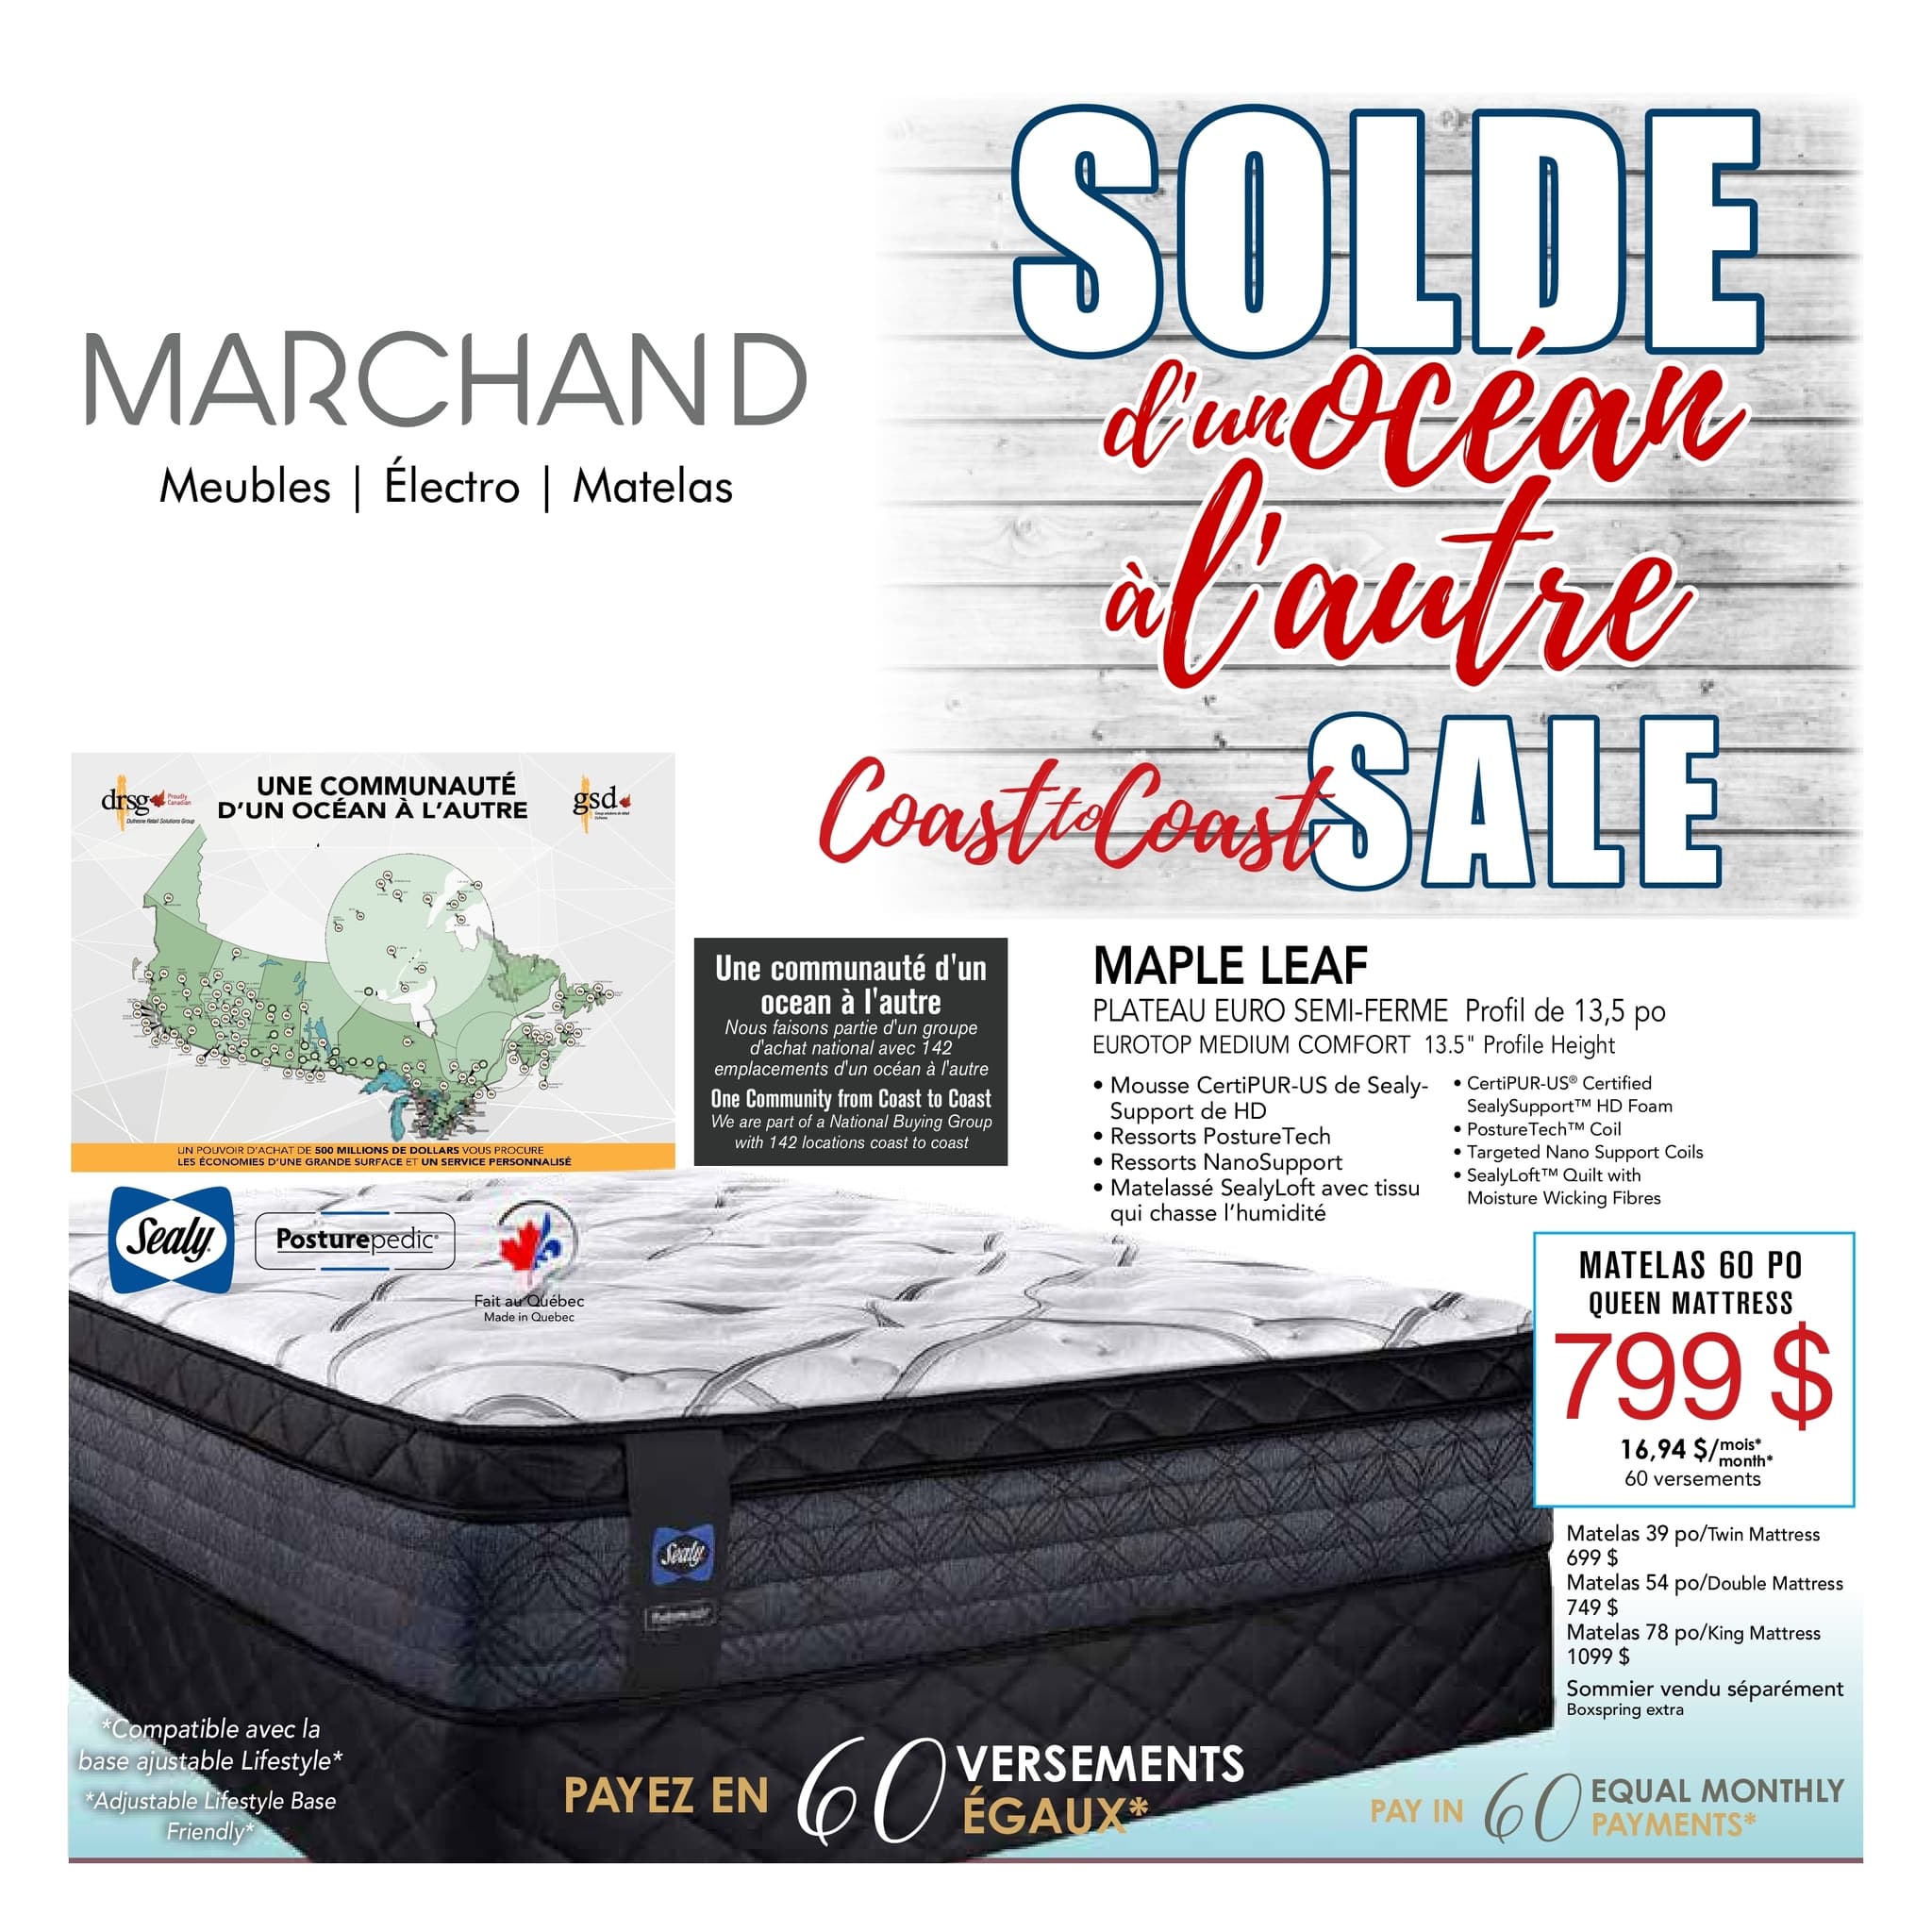 Circulaire Meubles Marchand - Matelas - Page 1